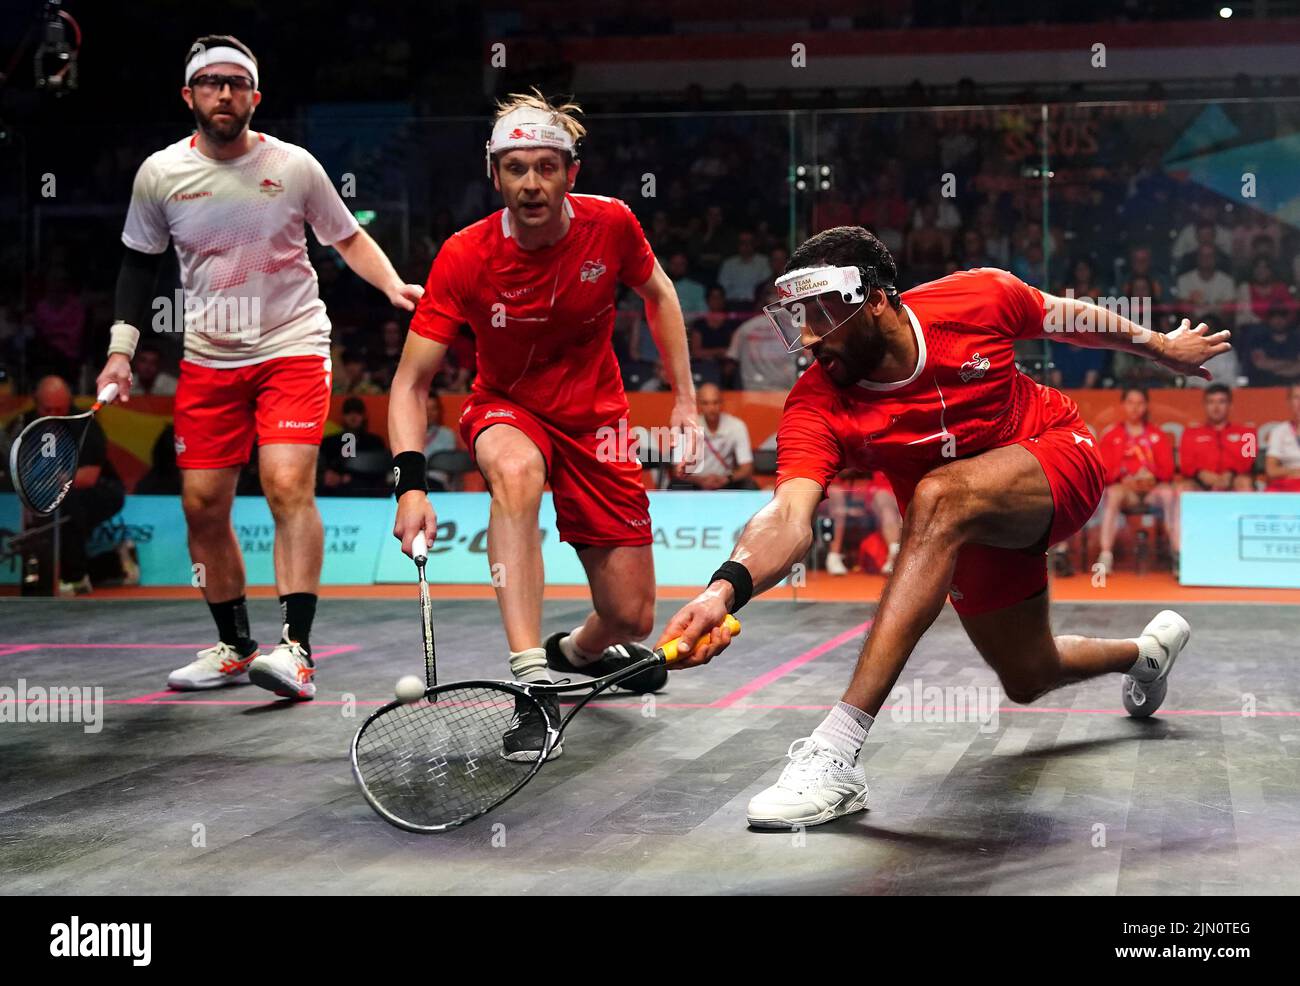 England's James Willstrop and Declan James in the Men's Squash Doubles Gold medal match against England's Adrian Waller and Daryl Selby at the University of Birmingham Hockey and Squash Centre on day eleven of the 2022 Commonwealth Games in Birmingham. Picture date: Monday August 8, 2022. Stock Photo